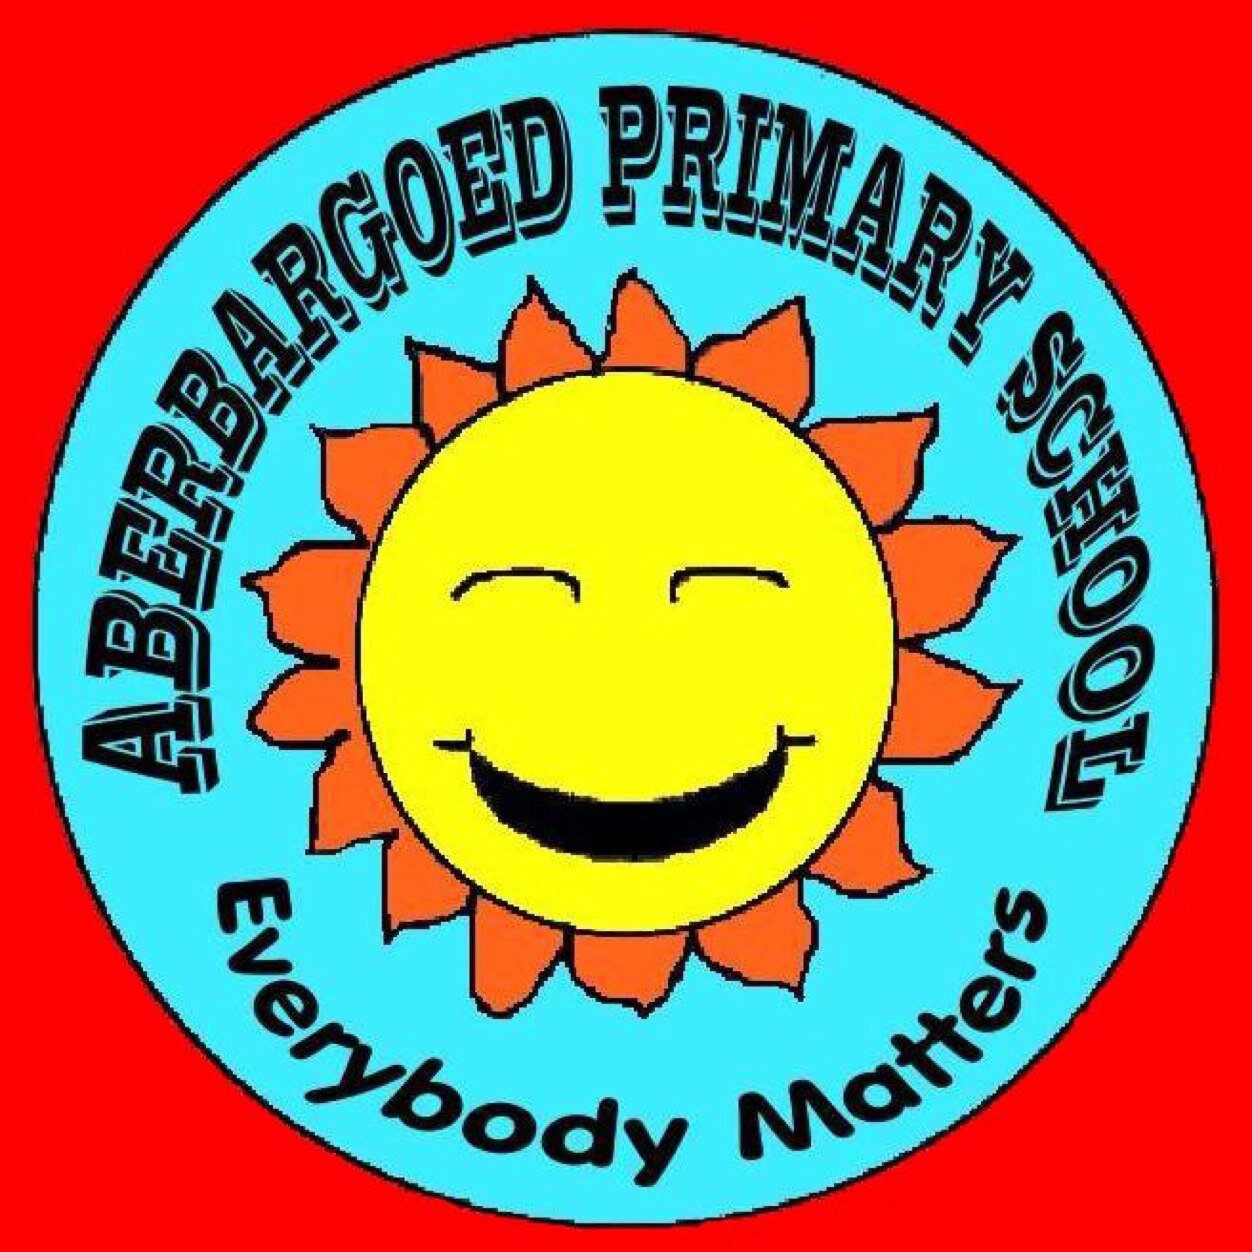 Aberbargoed Primary School serves the learning community of Aberbargoed in the heart of the Rhymney Valley, Wales. Everyone Matters - Mae Pawb Yn Bwysig